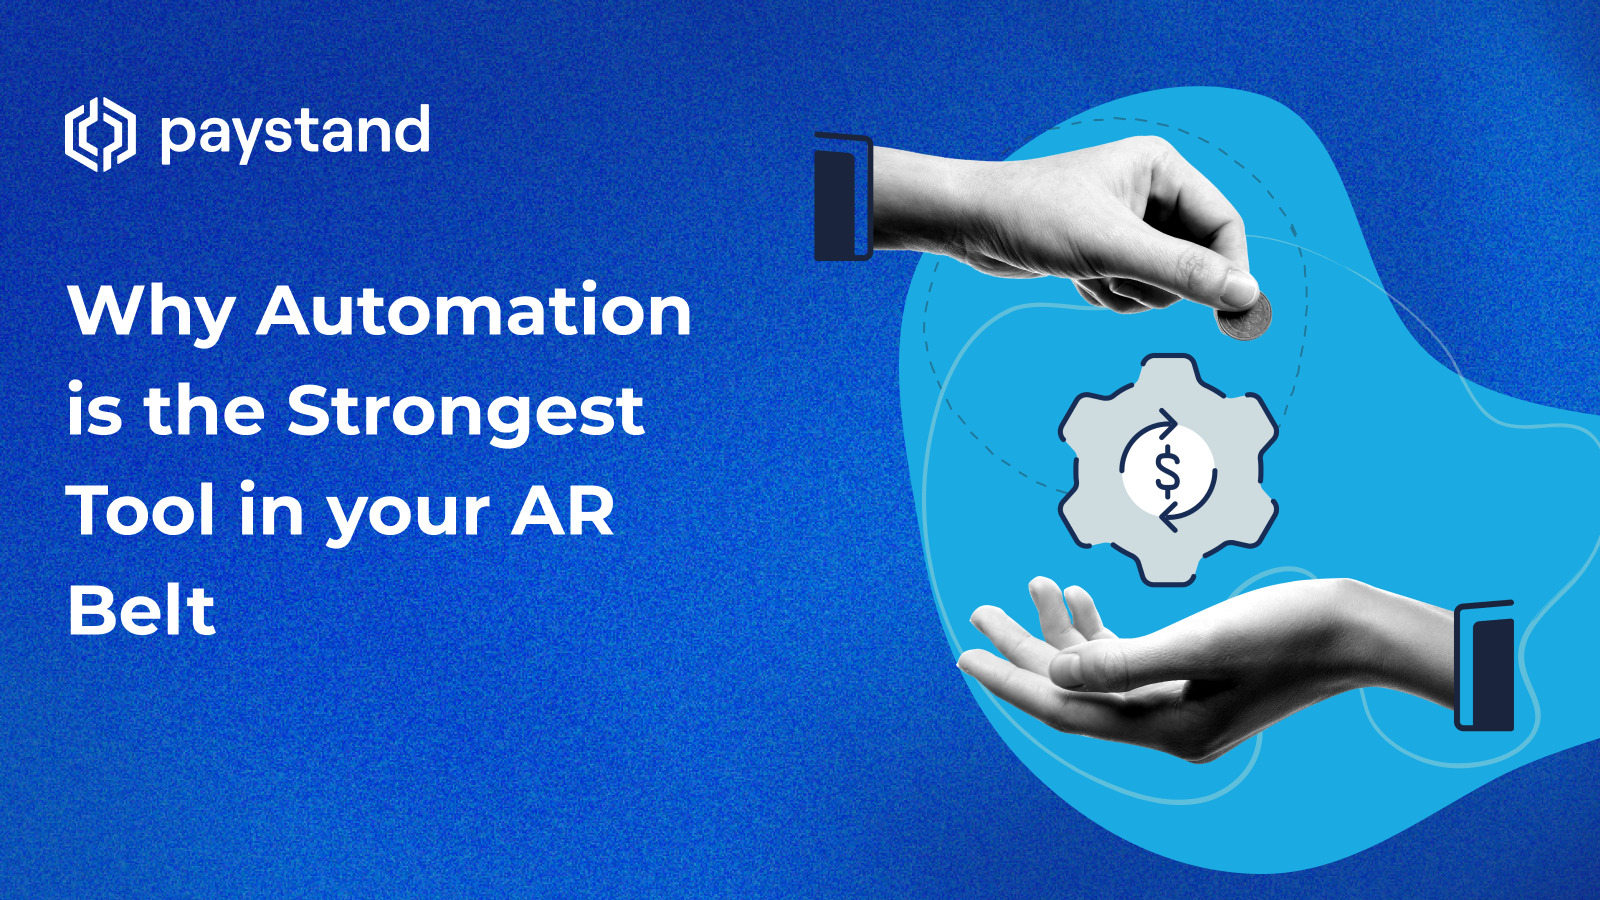 Why Automation is the Strongest Tool in your AR Belt